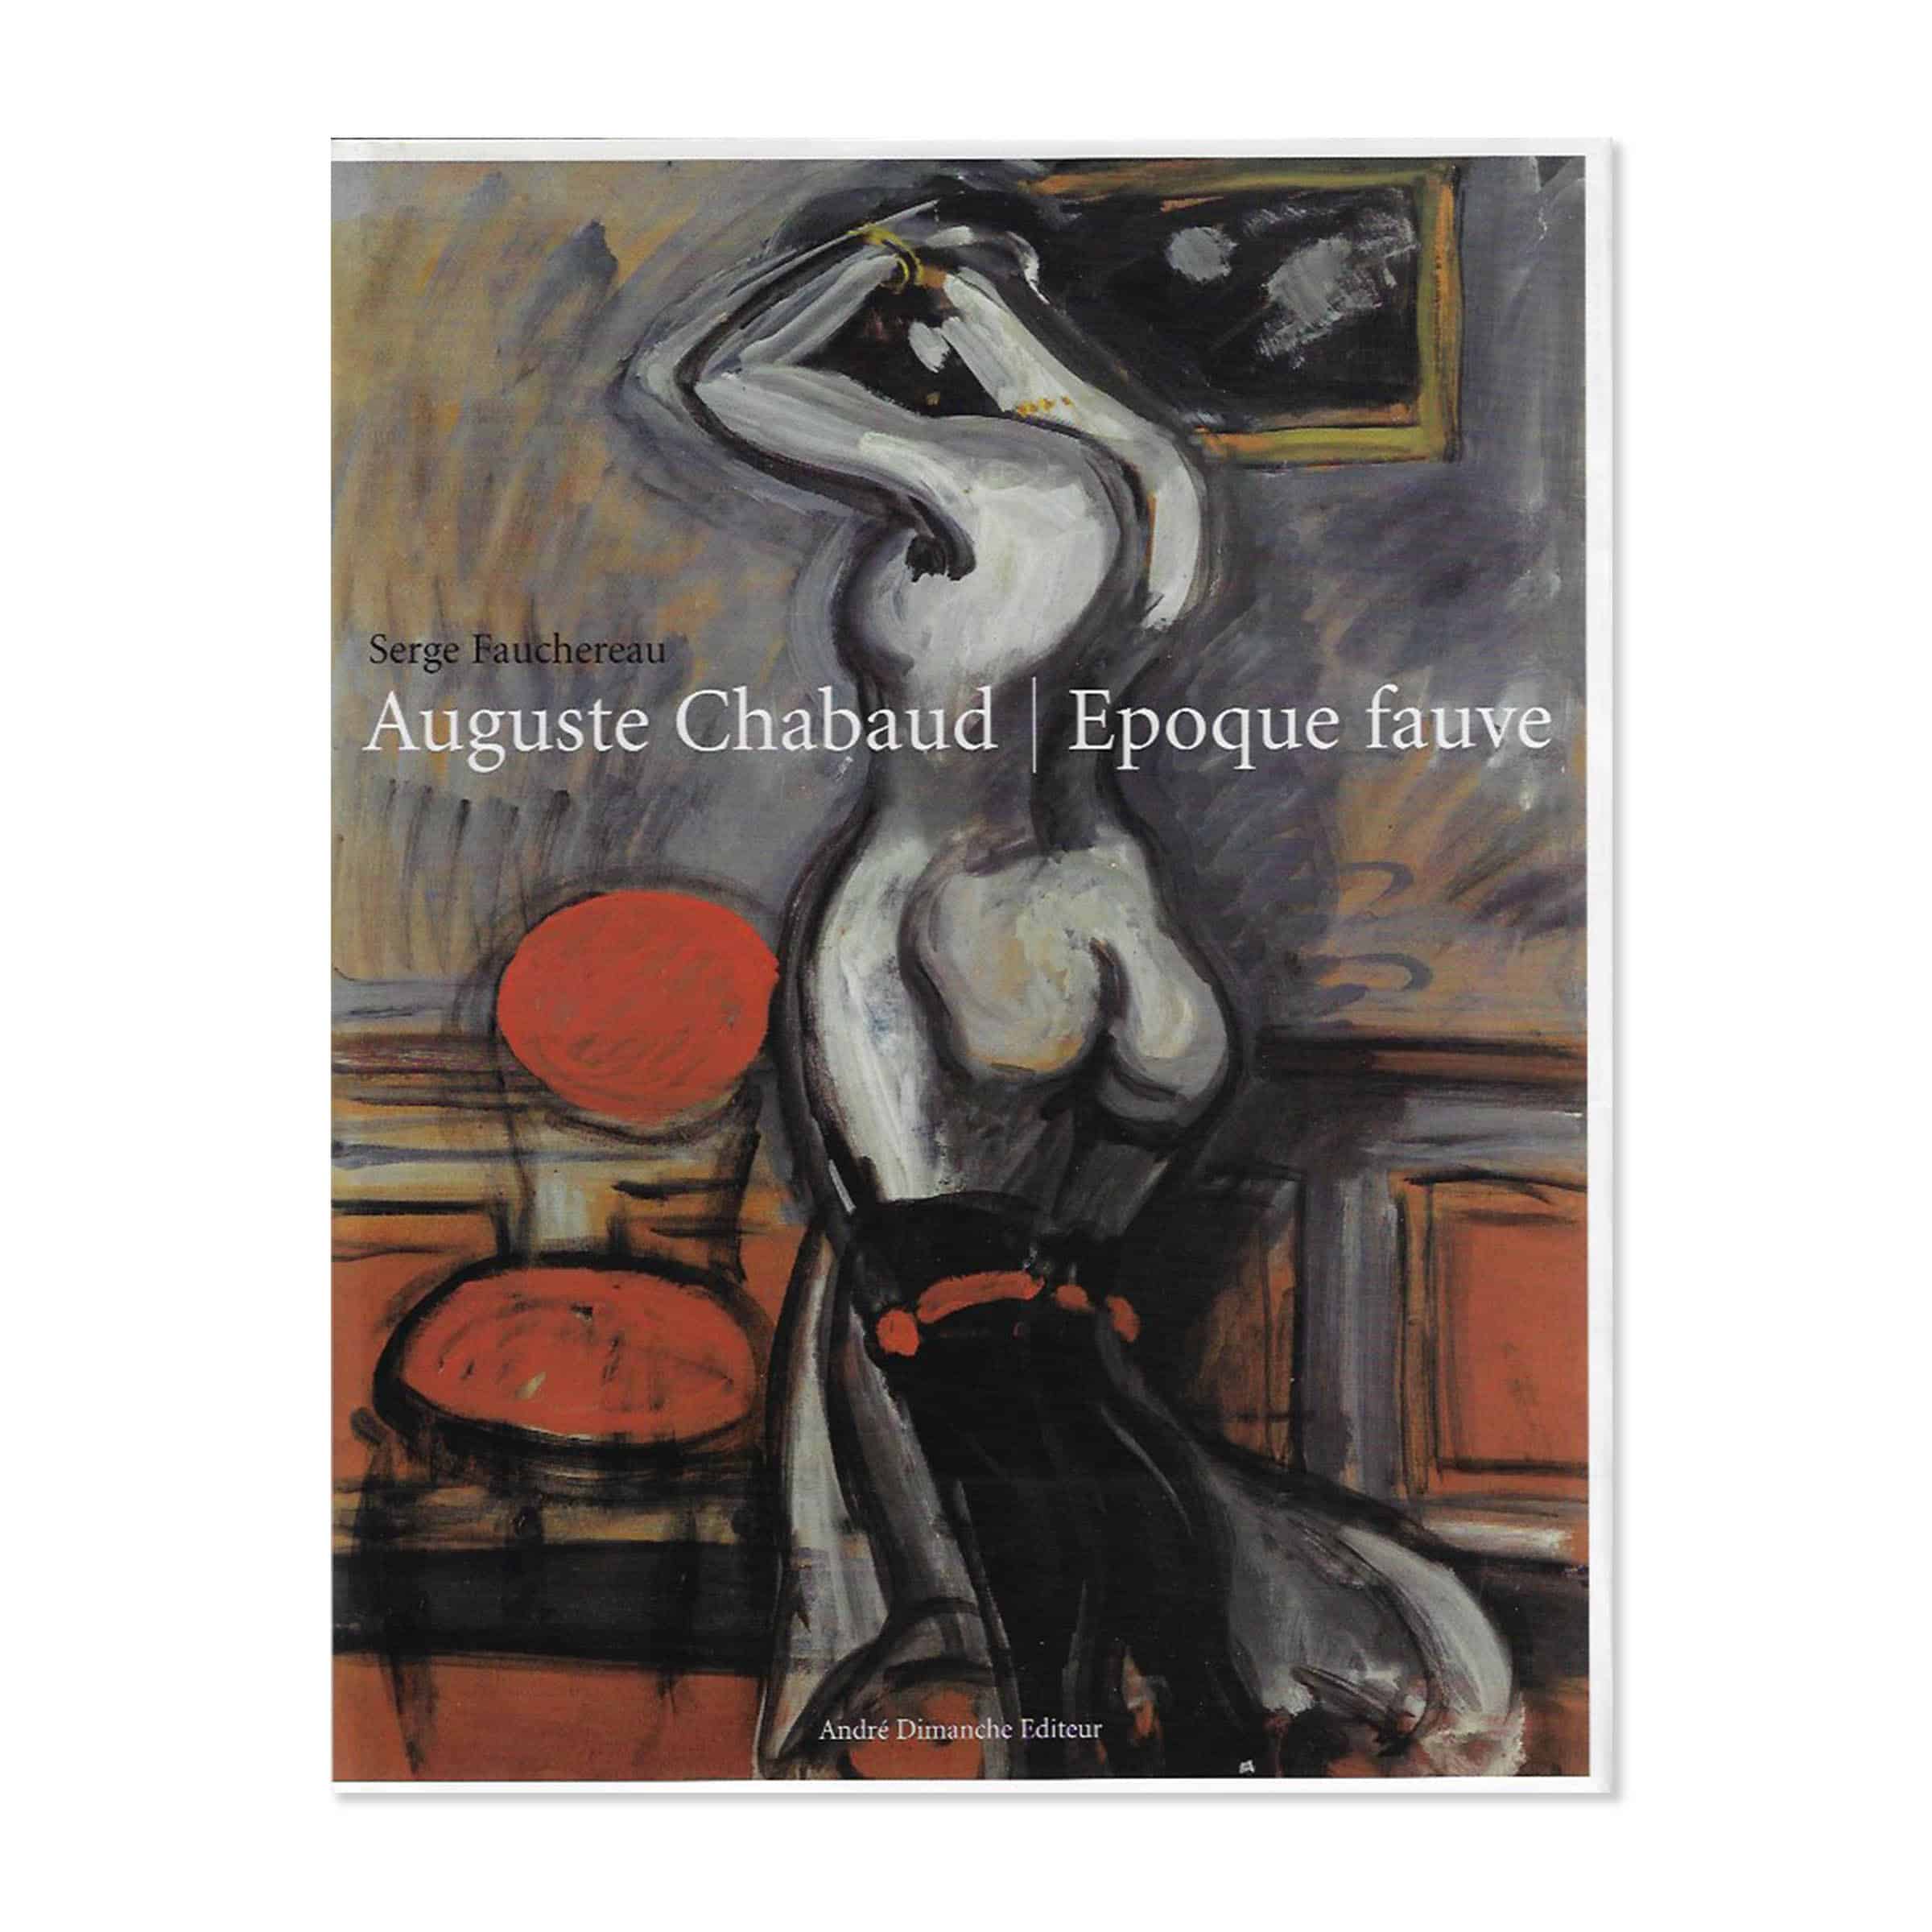 Chabaud. Fauve. Cover view